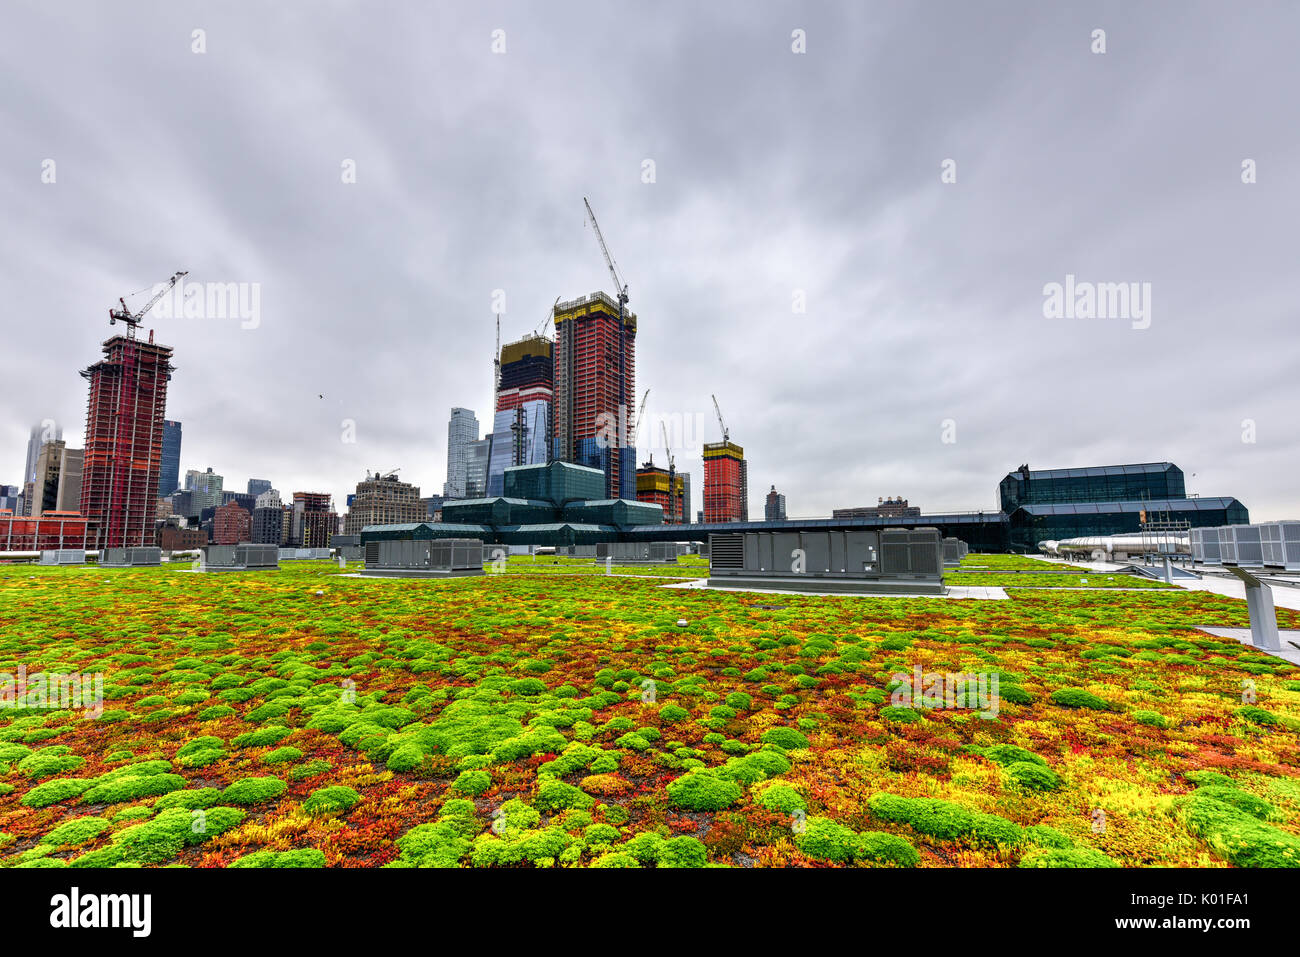 New York City - June 16, 2017: Greenroof on Jacob K. Javits Convention Center in New York City. Stock Photo